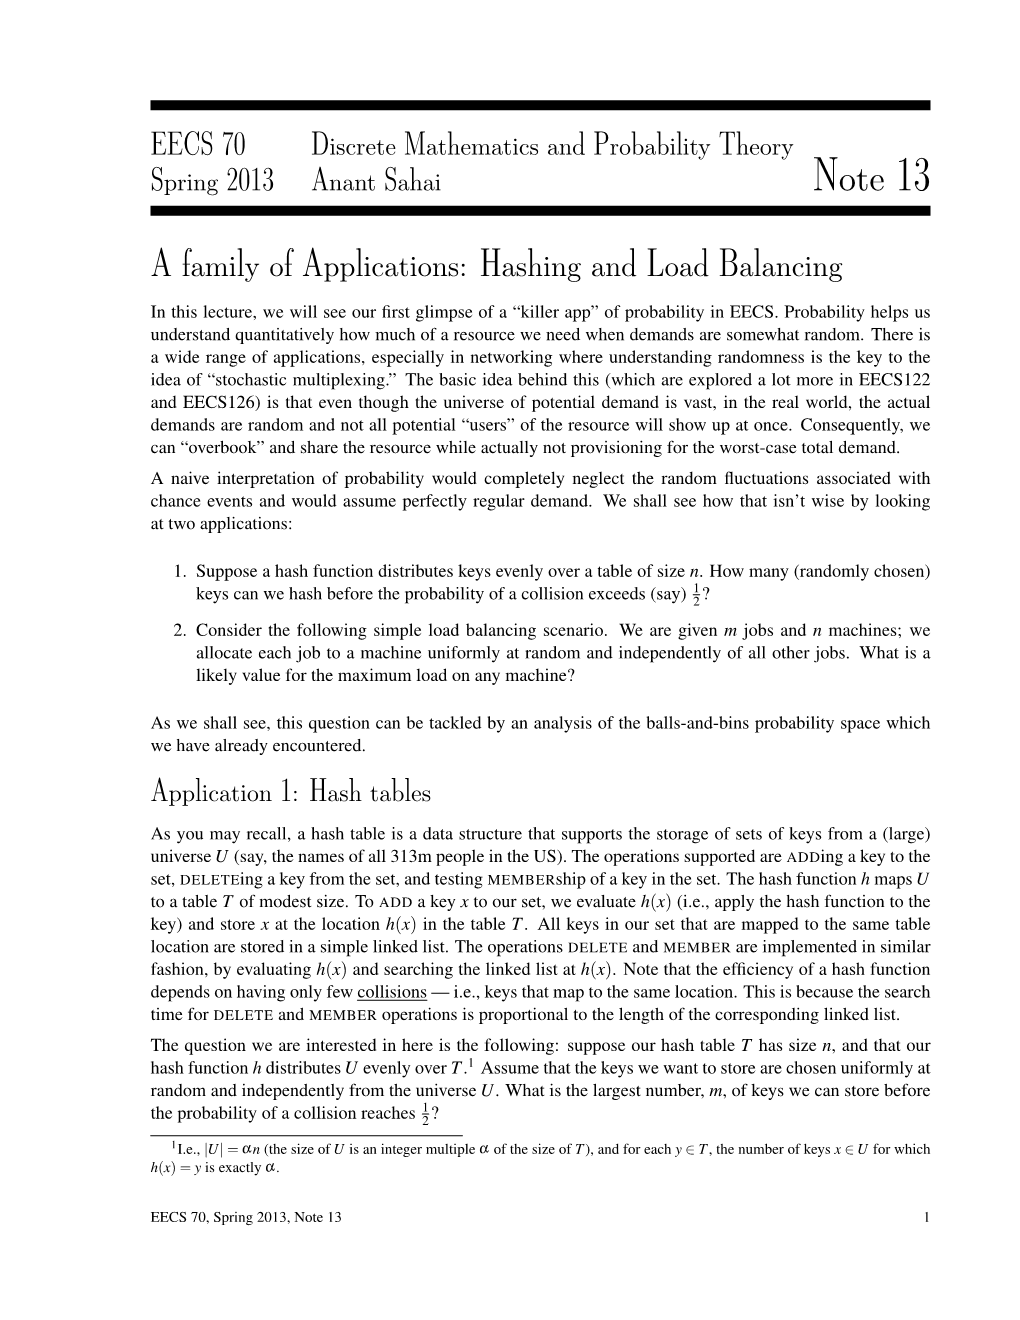 Lecture Notes #13: an Application: Hashing